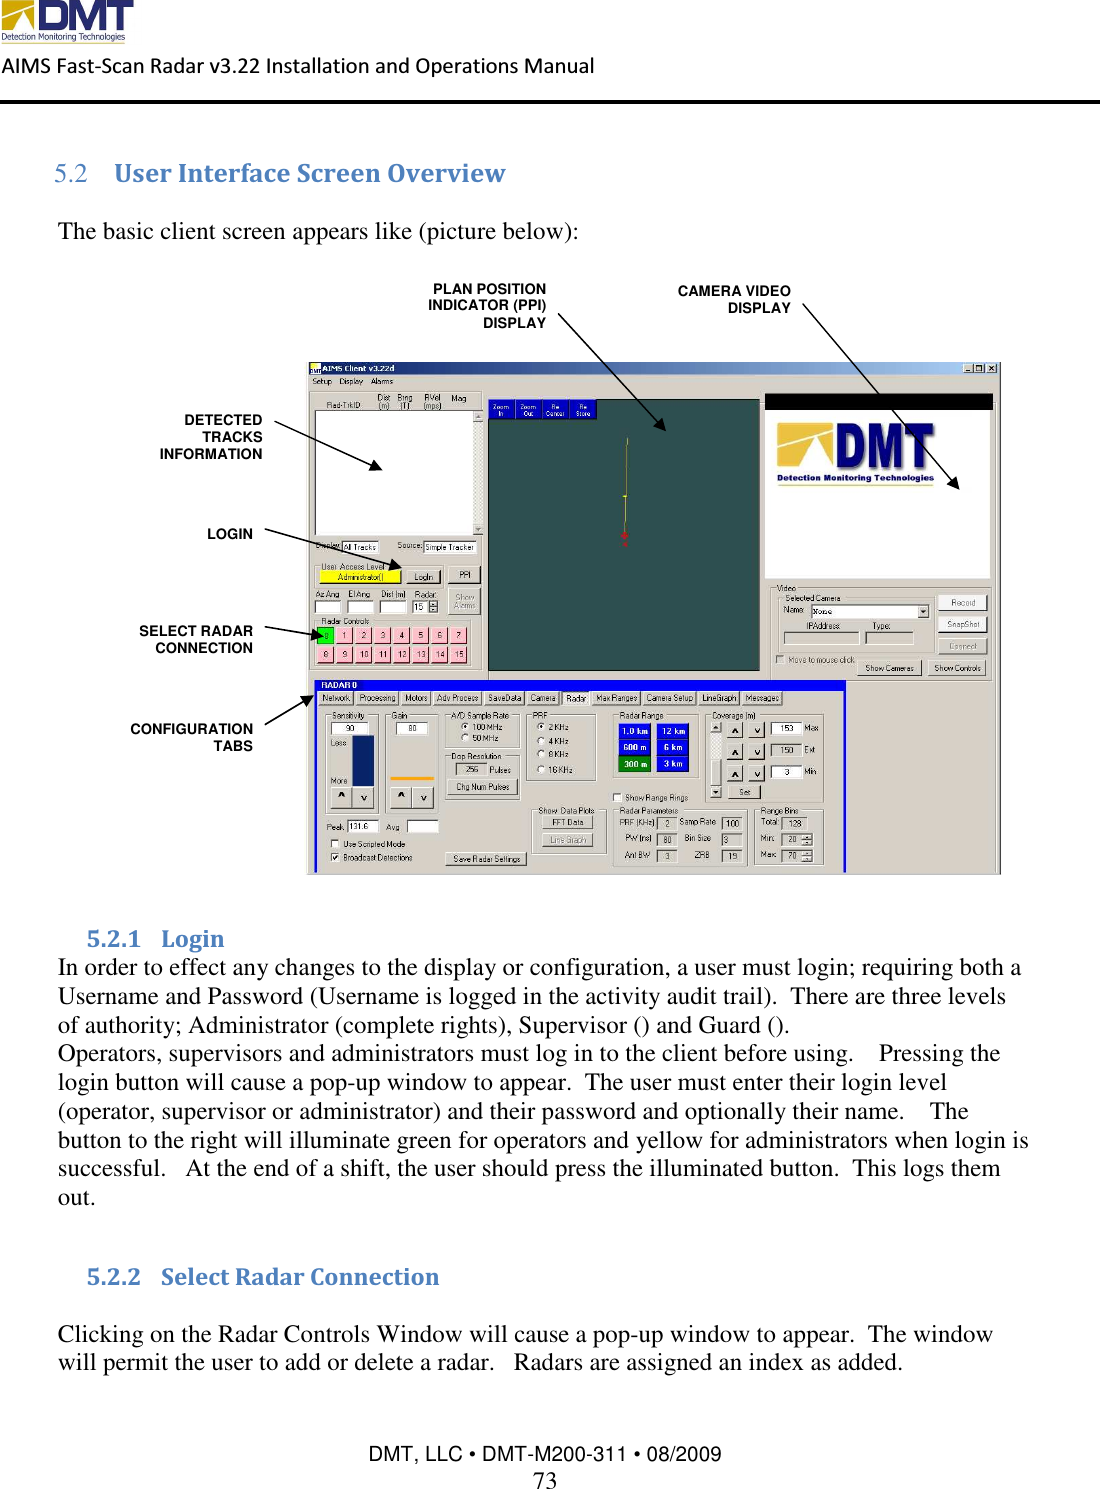  AIMS Fast-Scan Radar v3.22 Installation and Operations Manual    DMT, LLC • DMT-M200-311 • 08/2009 73  5.2 User Interface Screen Overview  The basic client screen appears like (picture below):    5.2.1 Login In order to effect any changes to the display or configuration, a user must login; requiring both a Username and Password (Username is logged in the activity audit trail).  There are three levels of authority; Administrator (complete rights), Supervisor () and Guard (). Operators, supervisors and administrators must log in to the client before using.    Pressing the login button will cause a pop-up window to appear.  The user must enter their login level (operator, supervisor or administrator) and their password and optionally their name.    The button to the right will illuminate green for operators and yellow for administrators when login is successful.   At the end of a shift, the user should press the illuminated button.  This logs them out.  5.2.2 Select Radar Connection  Clicking on the Radar Controls Window will cause a pop-up window to appear.  The window will permit the user to add or delete a radar.   Radars are assigned an index as added.   DETECTED TRACKS INFORMATION PLAN POSITION INDICATOR (PPI) DISPLAY CAMERA VIDEO DISPLAY CONFIGURATION TABS SELECT RADAR CONNECTION LOGIN 